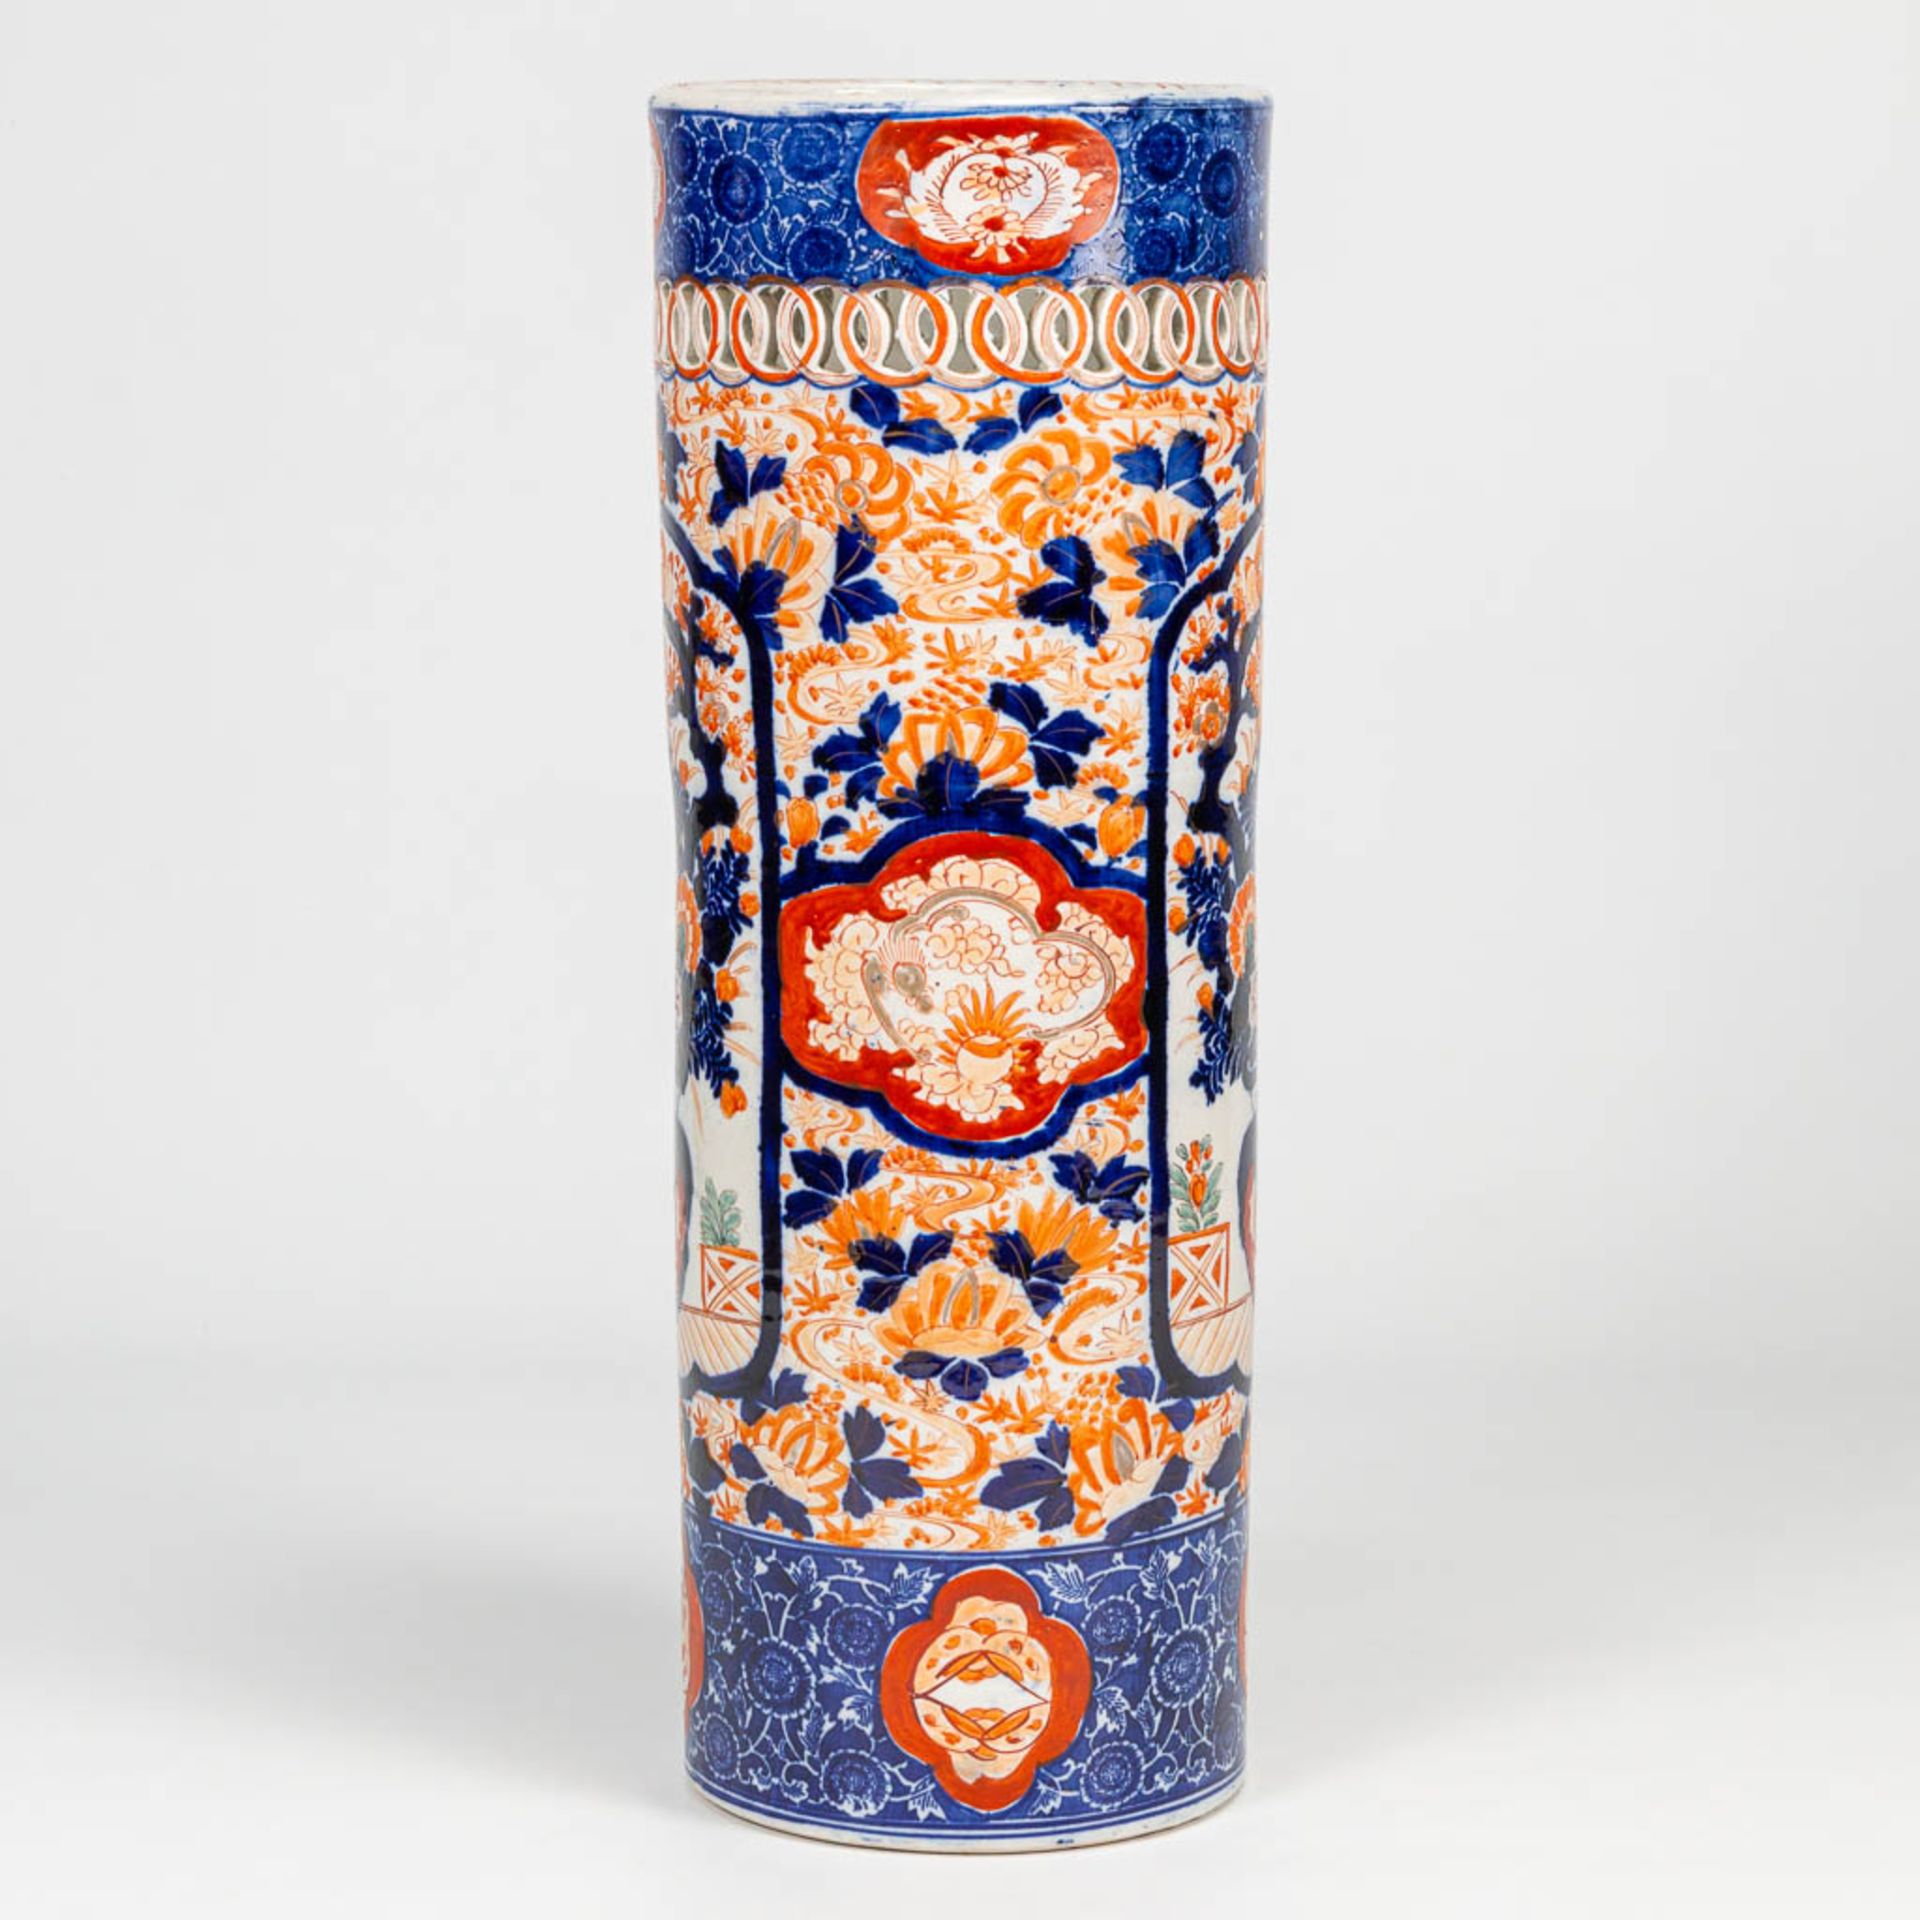 An Imari umbrella stand, vase made of porcelain in Japan. 19th/20th century. (61 x 22 cm) - Image 4 of 17